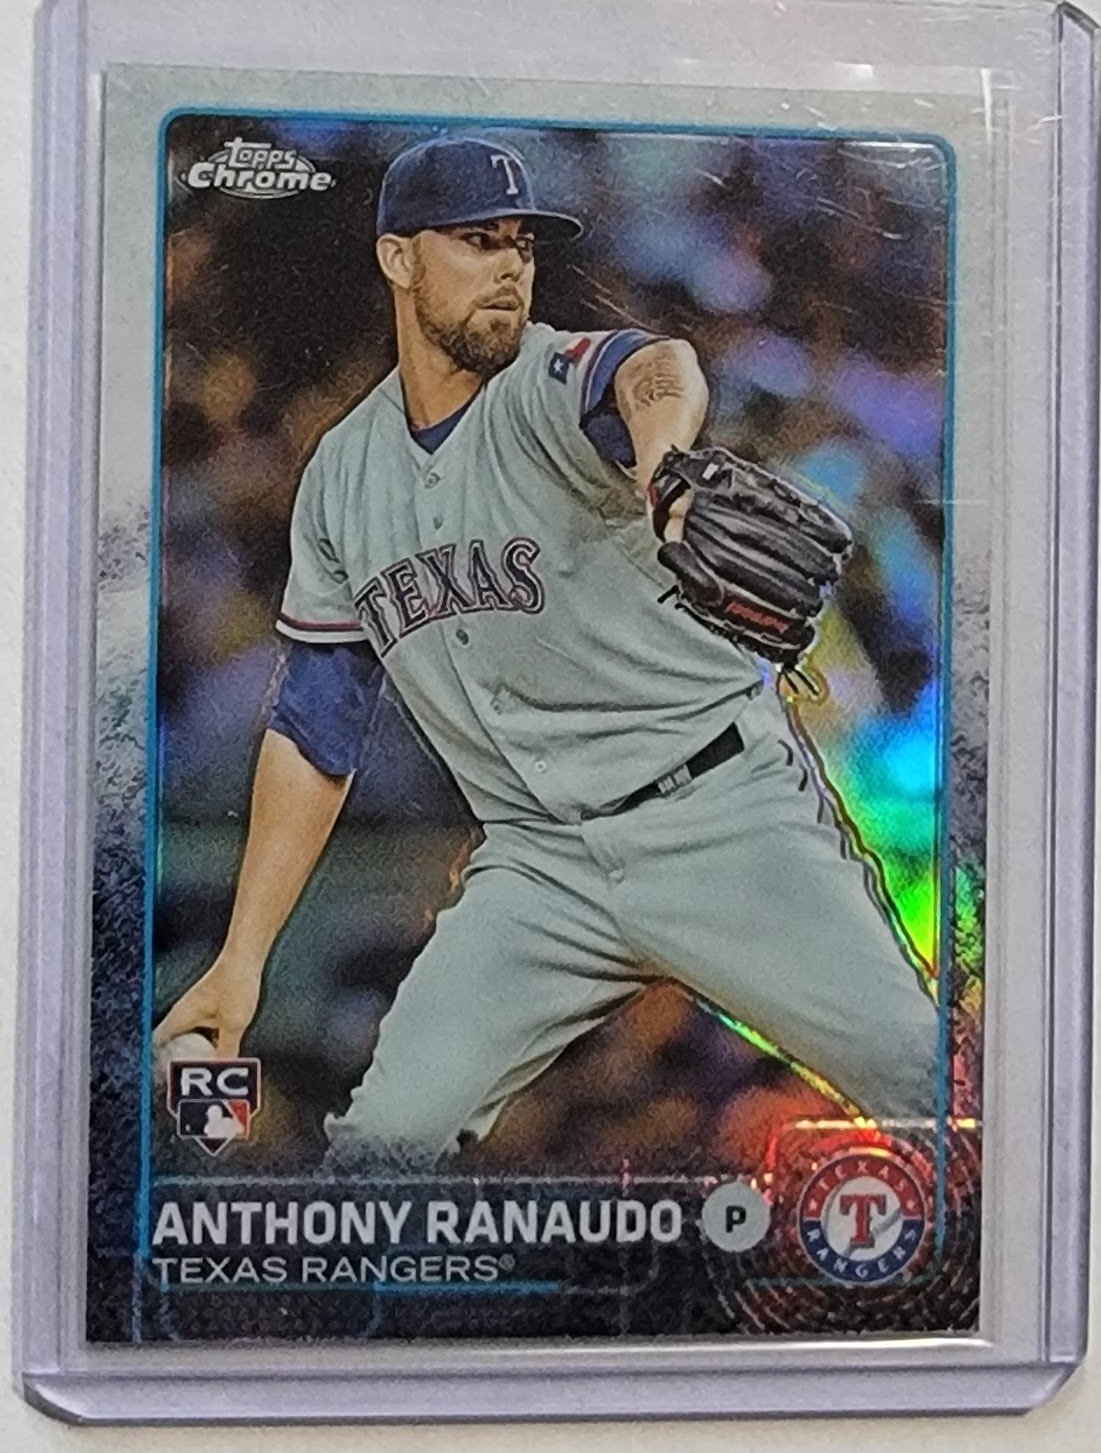 2015 Topps Chrome Anthony Ranaudo Rookie Refractor Baseball Card TPTV simple Xclusive Collectibles   